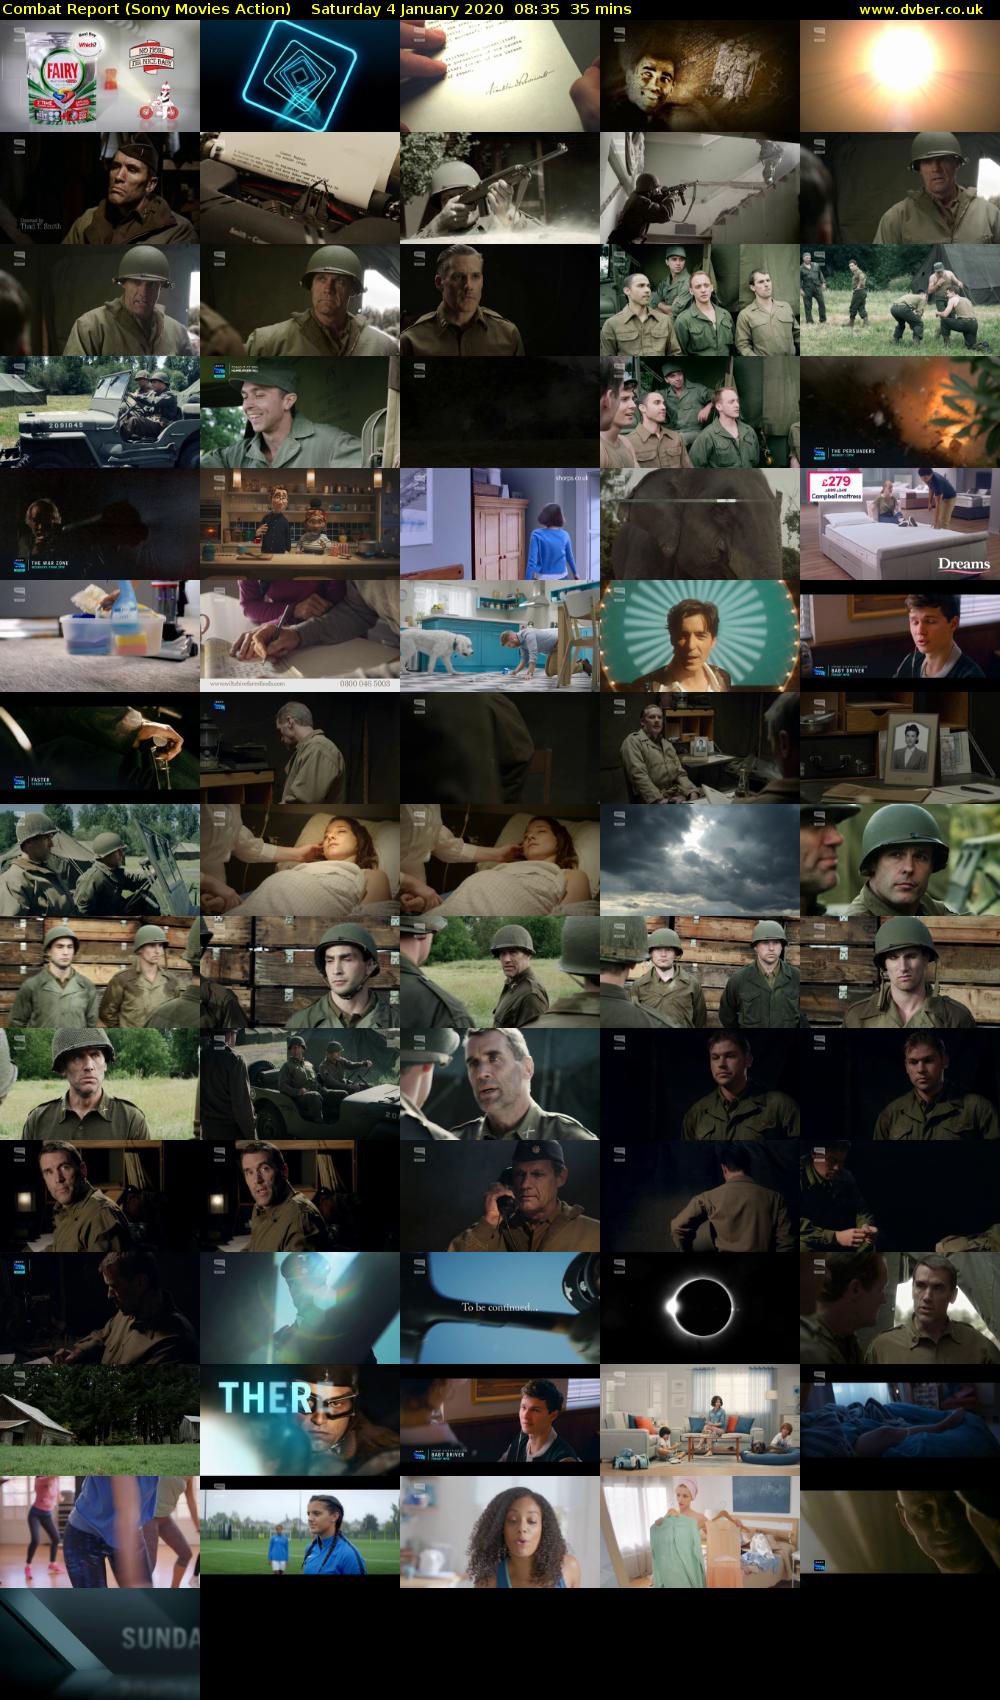 Combat Report (Sony Movies Action) Saturday 4 January 2020 08:35 - 09:10